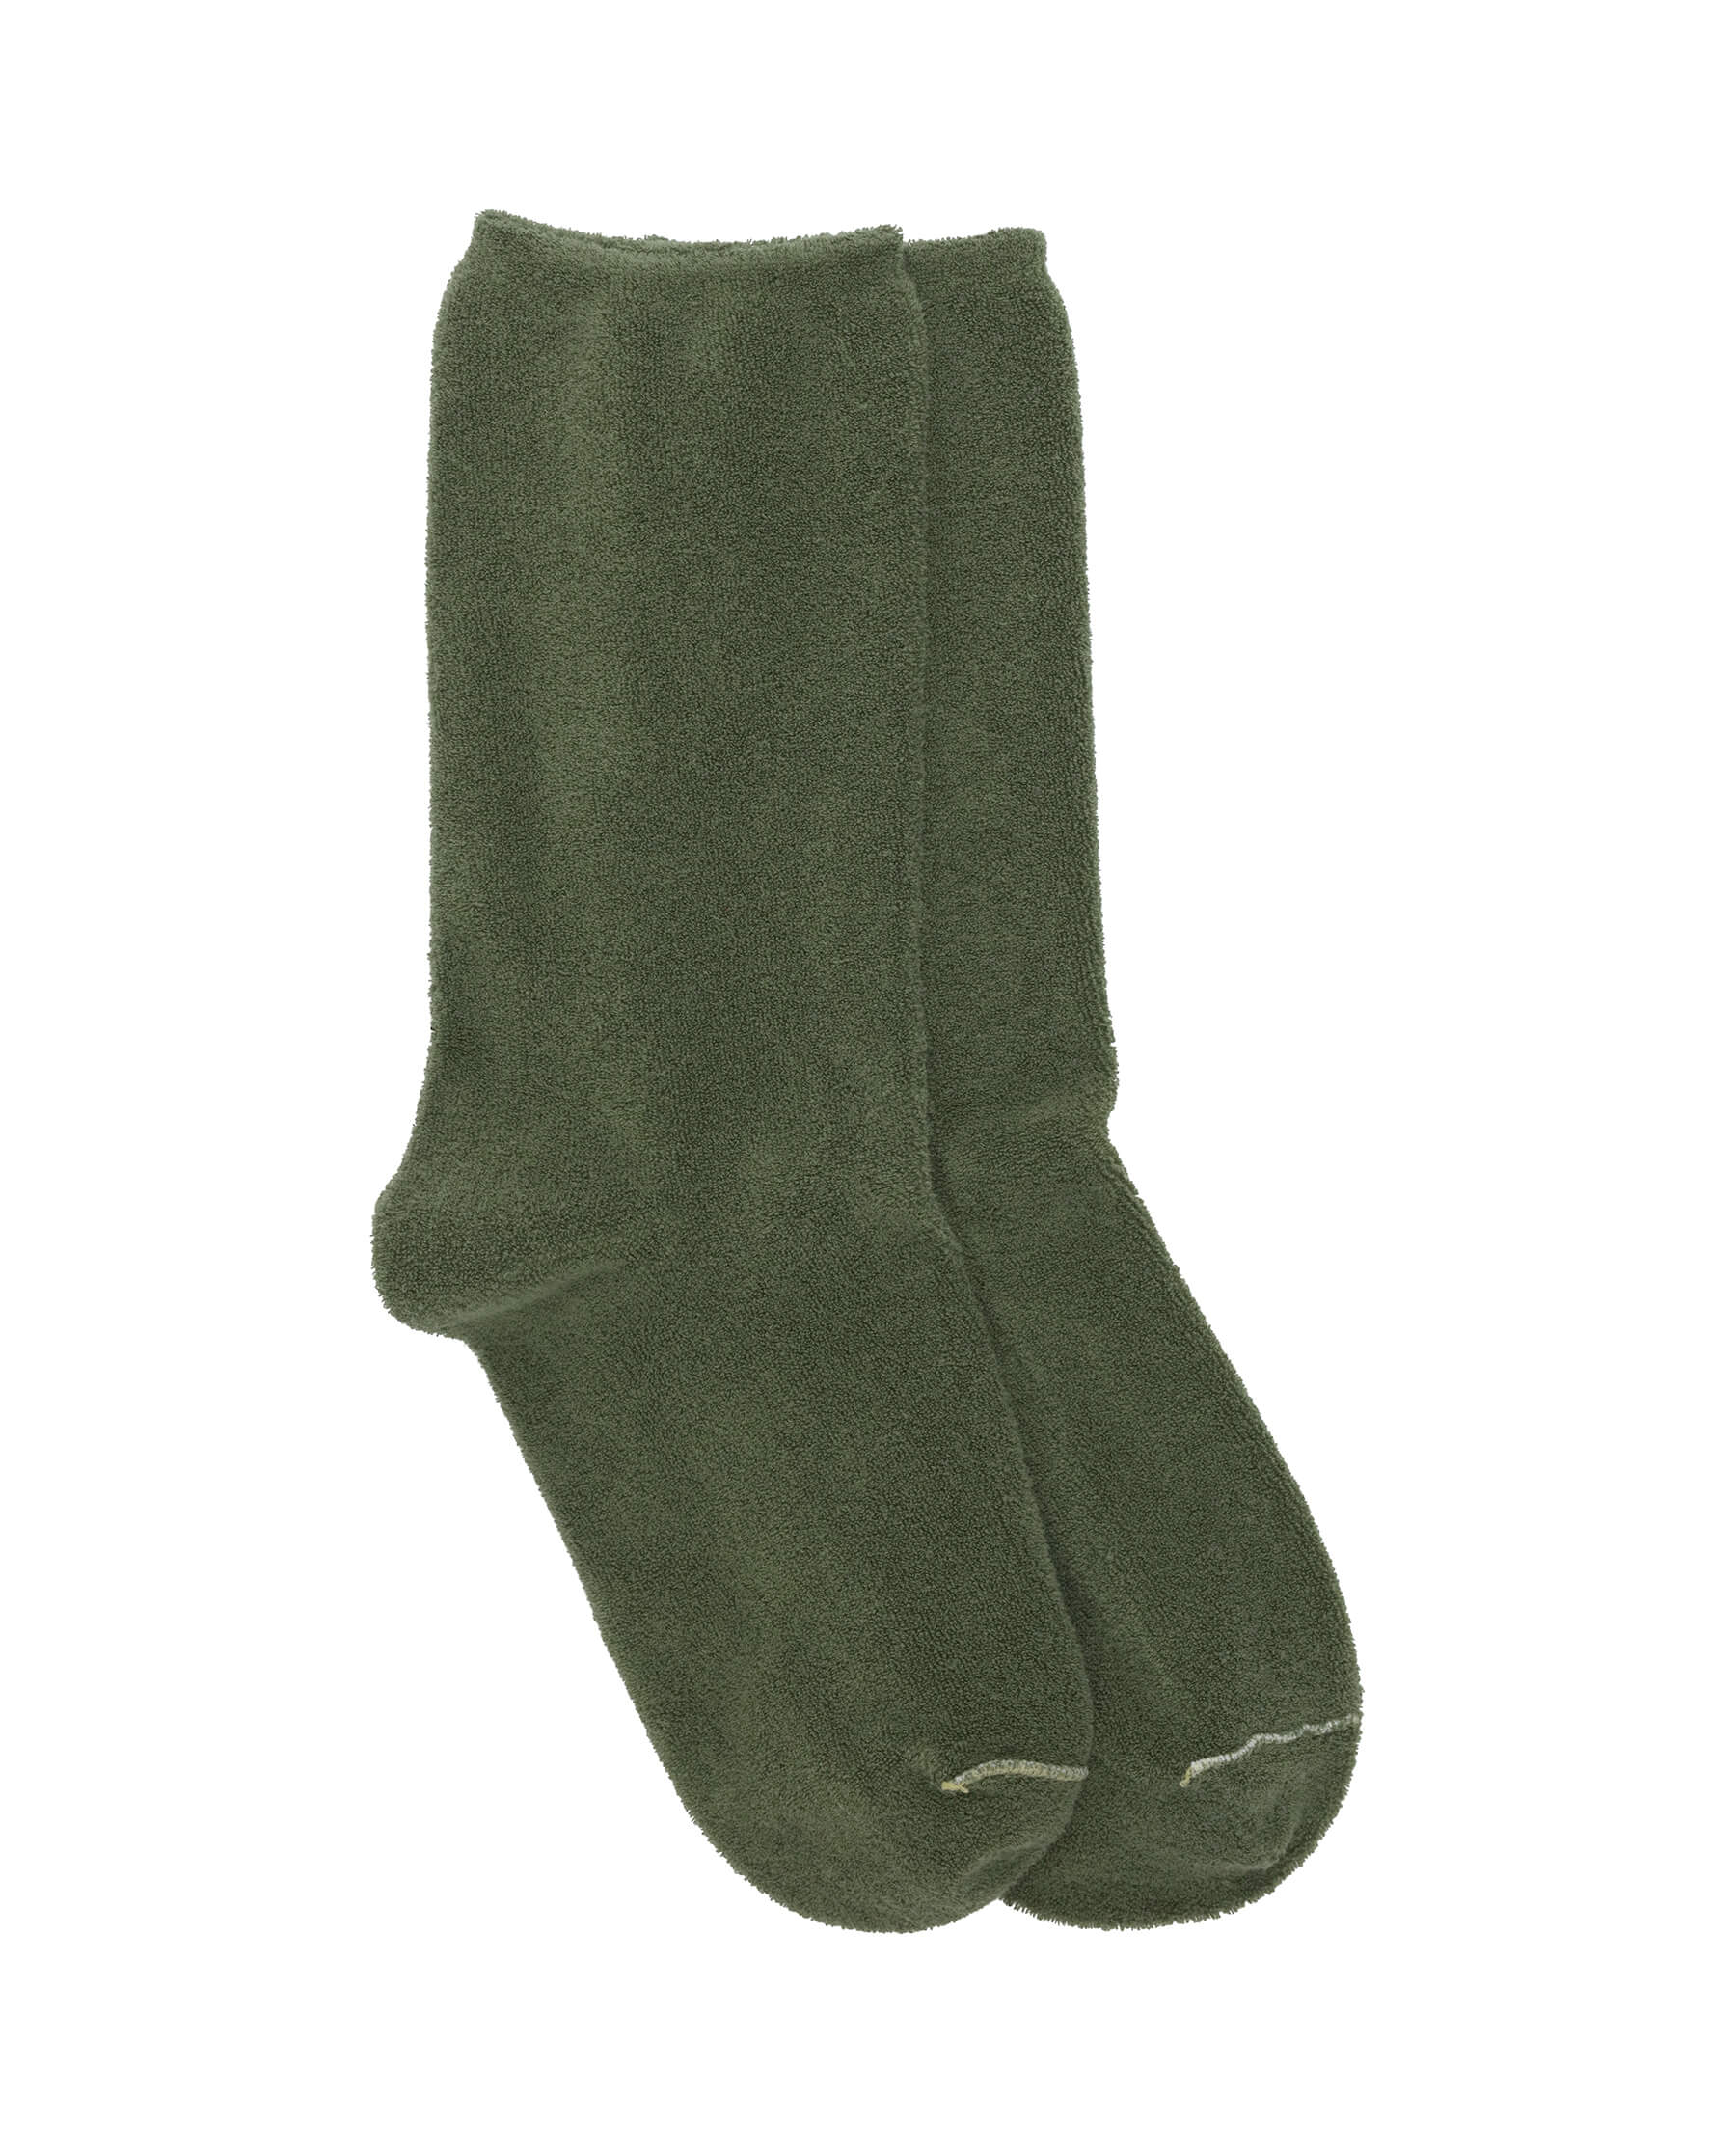 The Microterry Sock. -- Army SOCKS THE GREAT. SU23 MICROTERRY